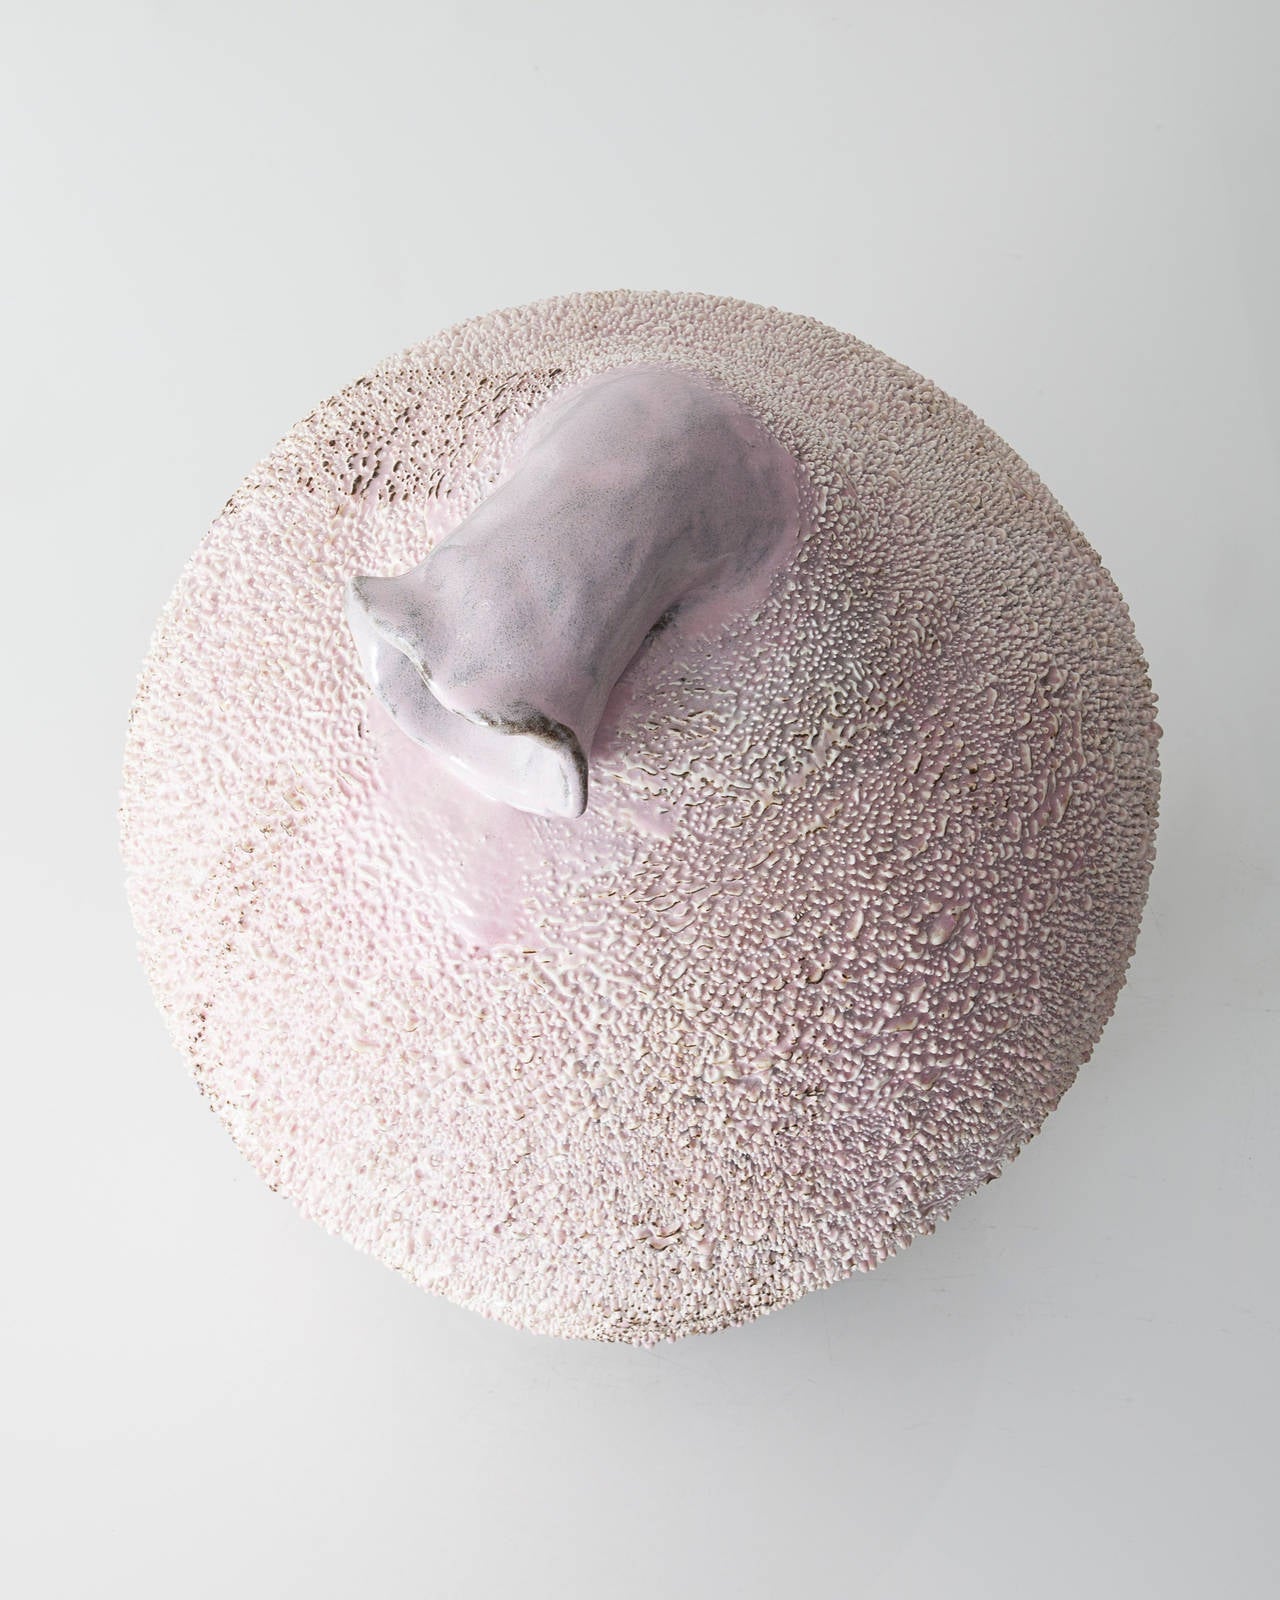 Glazed Unique Accretion with Porcelain Slip by the Haas Brothers